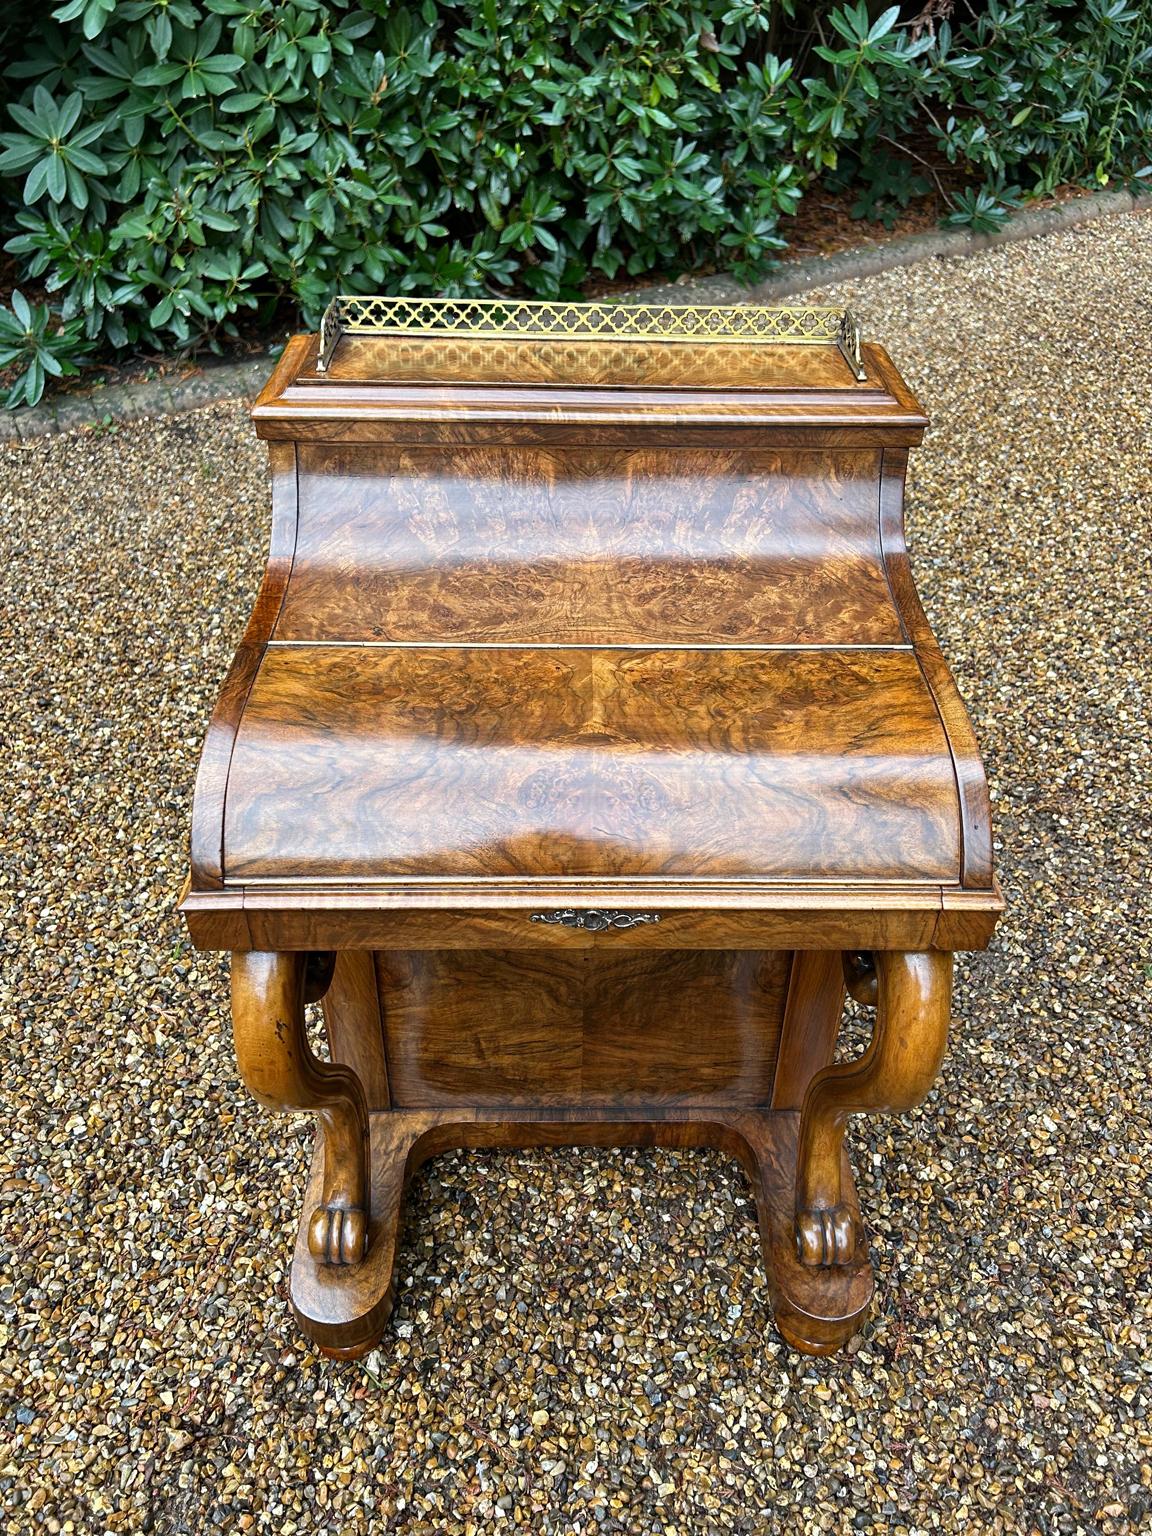 A High Quality 19th Century figured Victorian Burr Walnut Piano Davenport with a pop up top. The pull-out fitted interior, includes: red leather adjustable writing surface slope with and pen/ink wells and two small drawers.

The ‘pop up top’ is